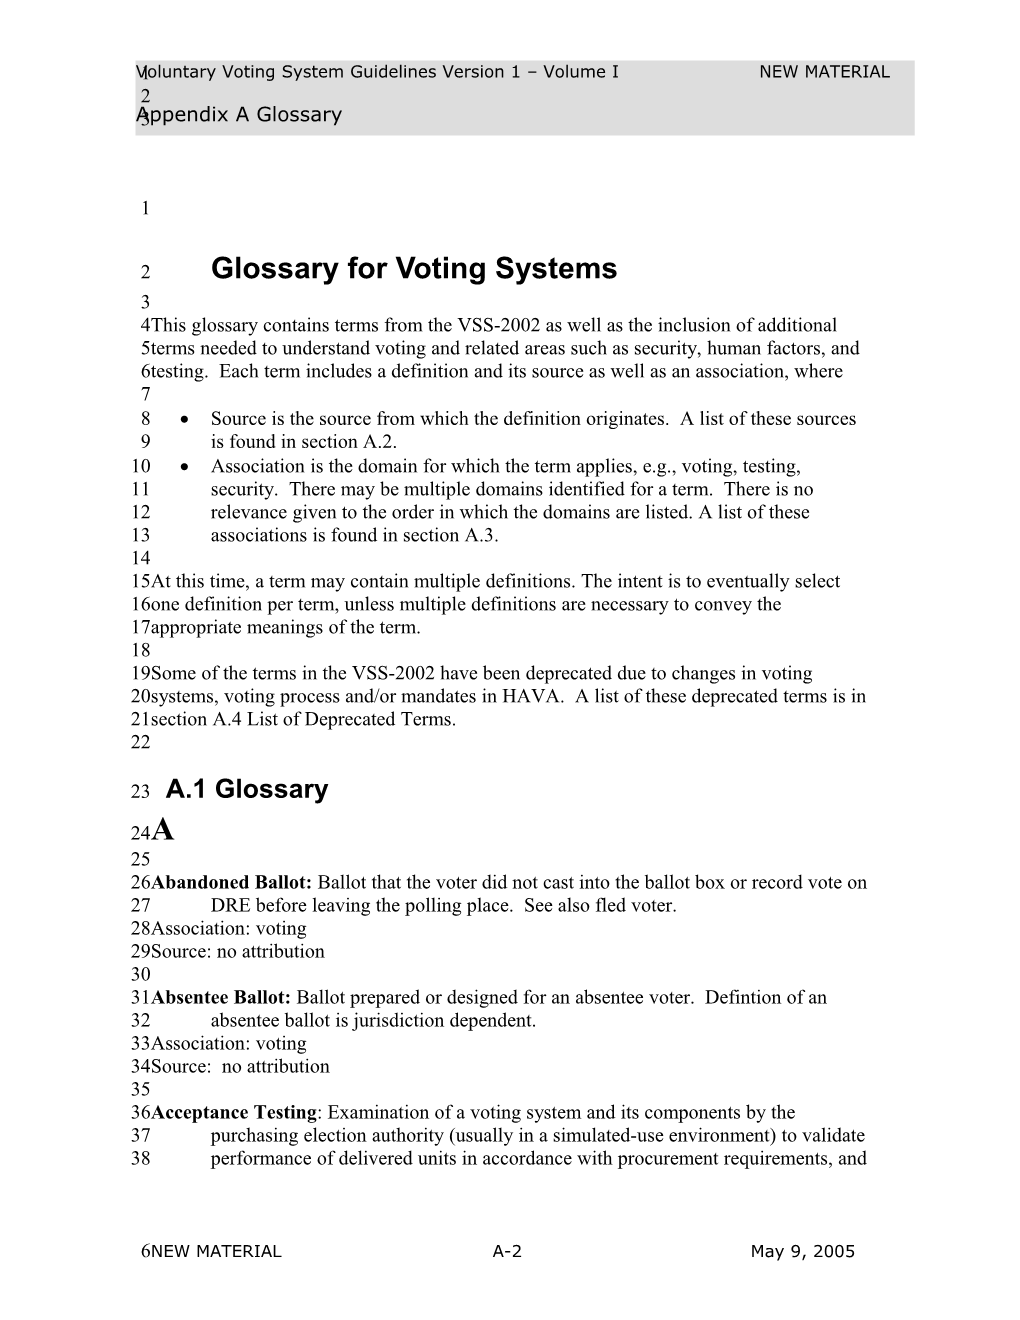 A Glossary for Voting Systems